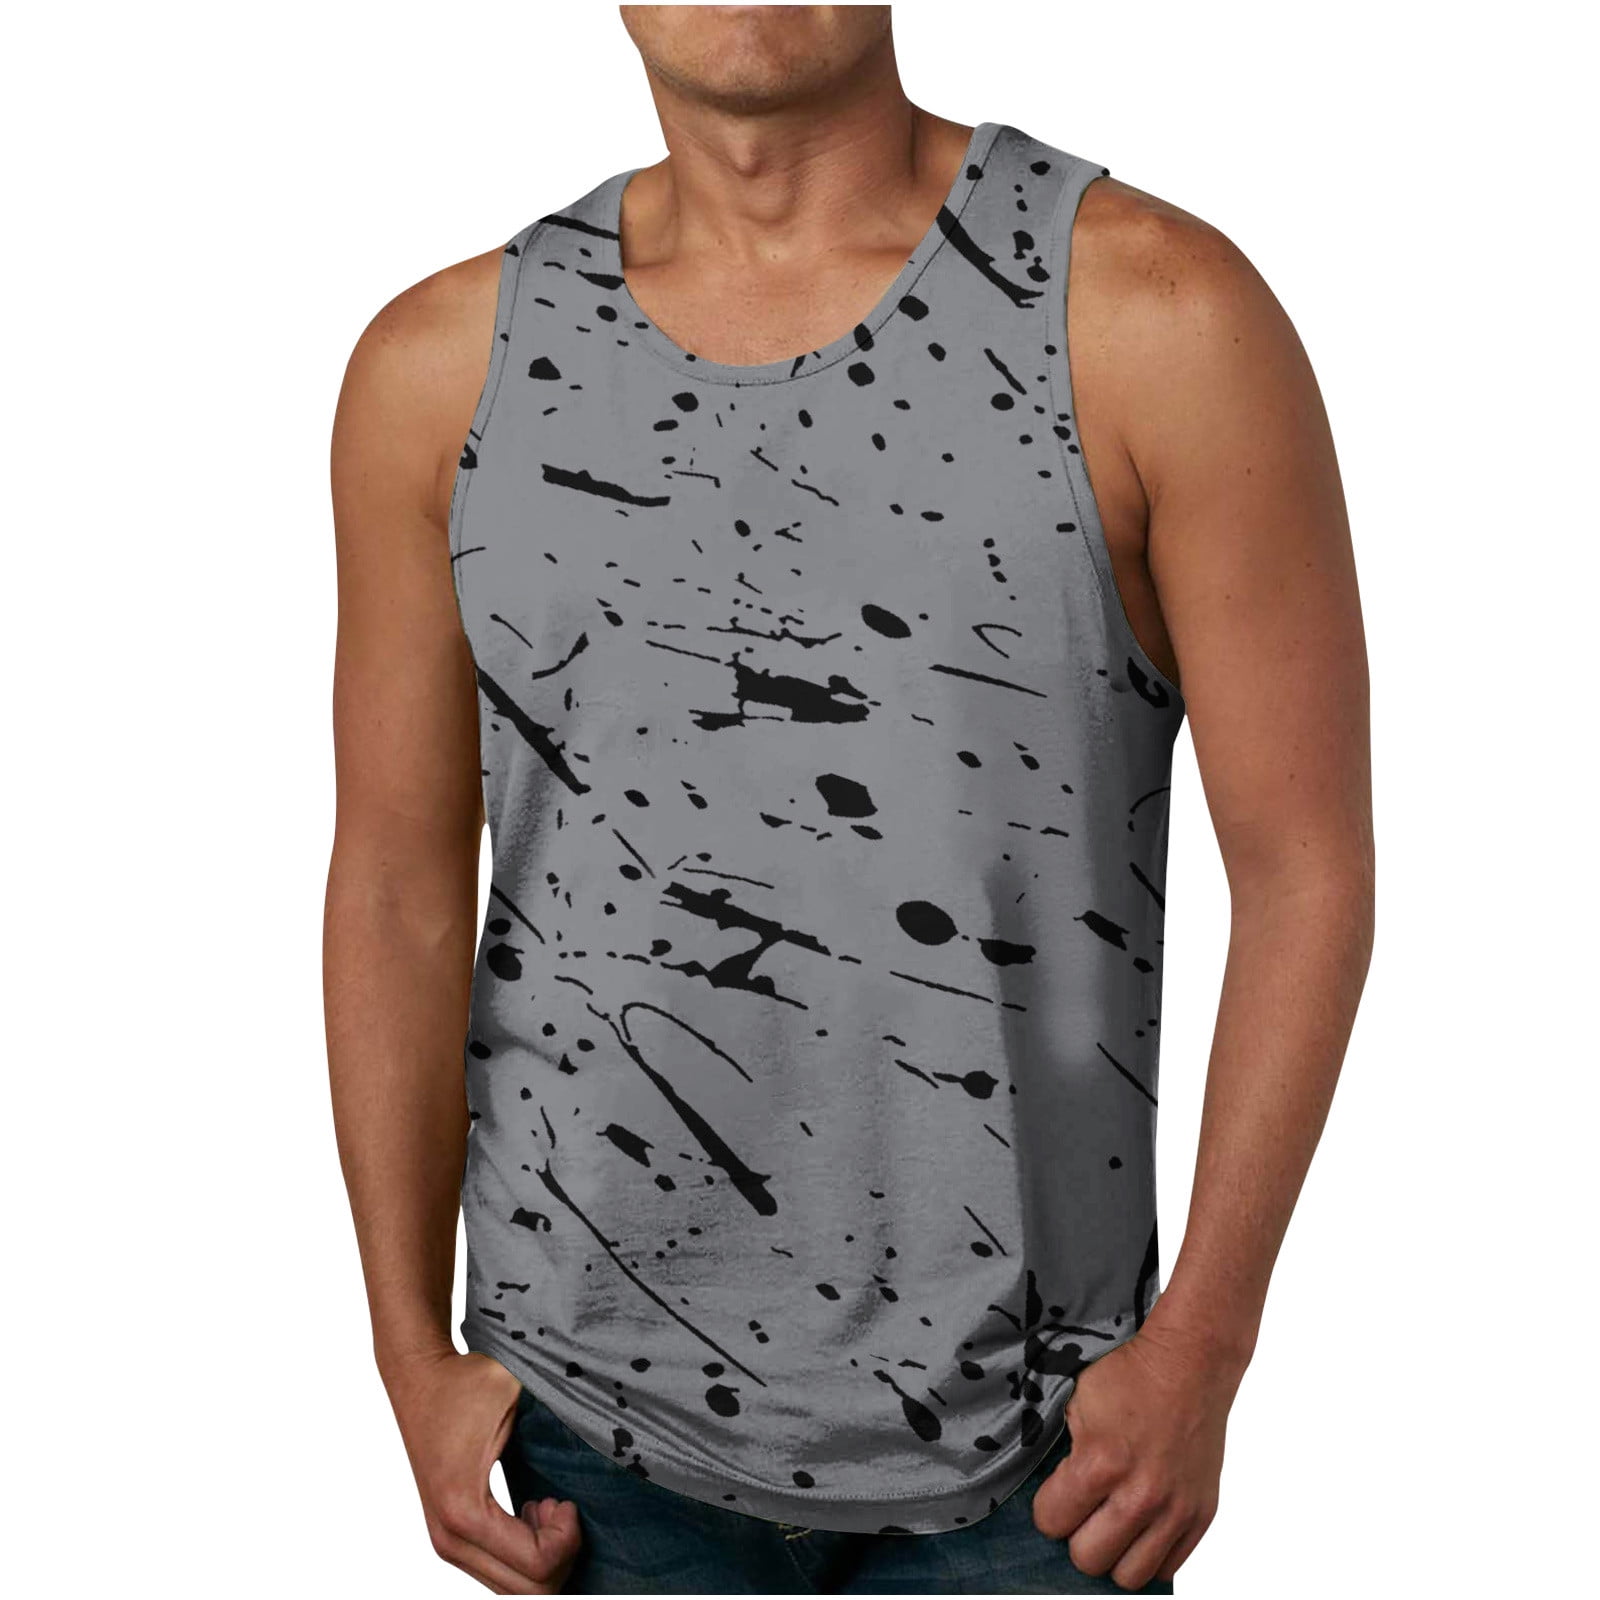 Tank Tops Men,Men's Sleeveless Workout Shirts,American Flag Muscle T-Shirt  for Men Big and Tall Beach Graphic Tee Tank Tops